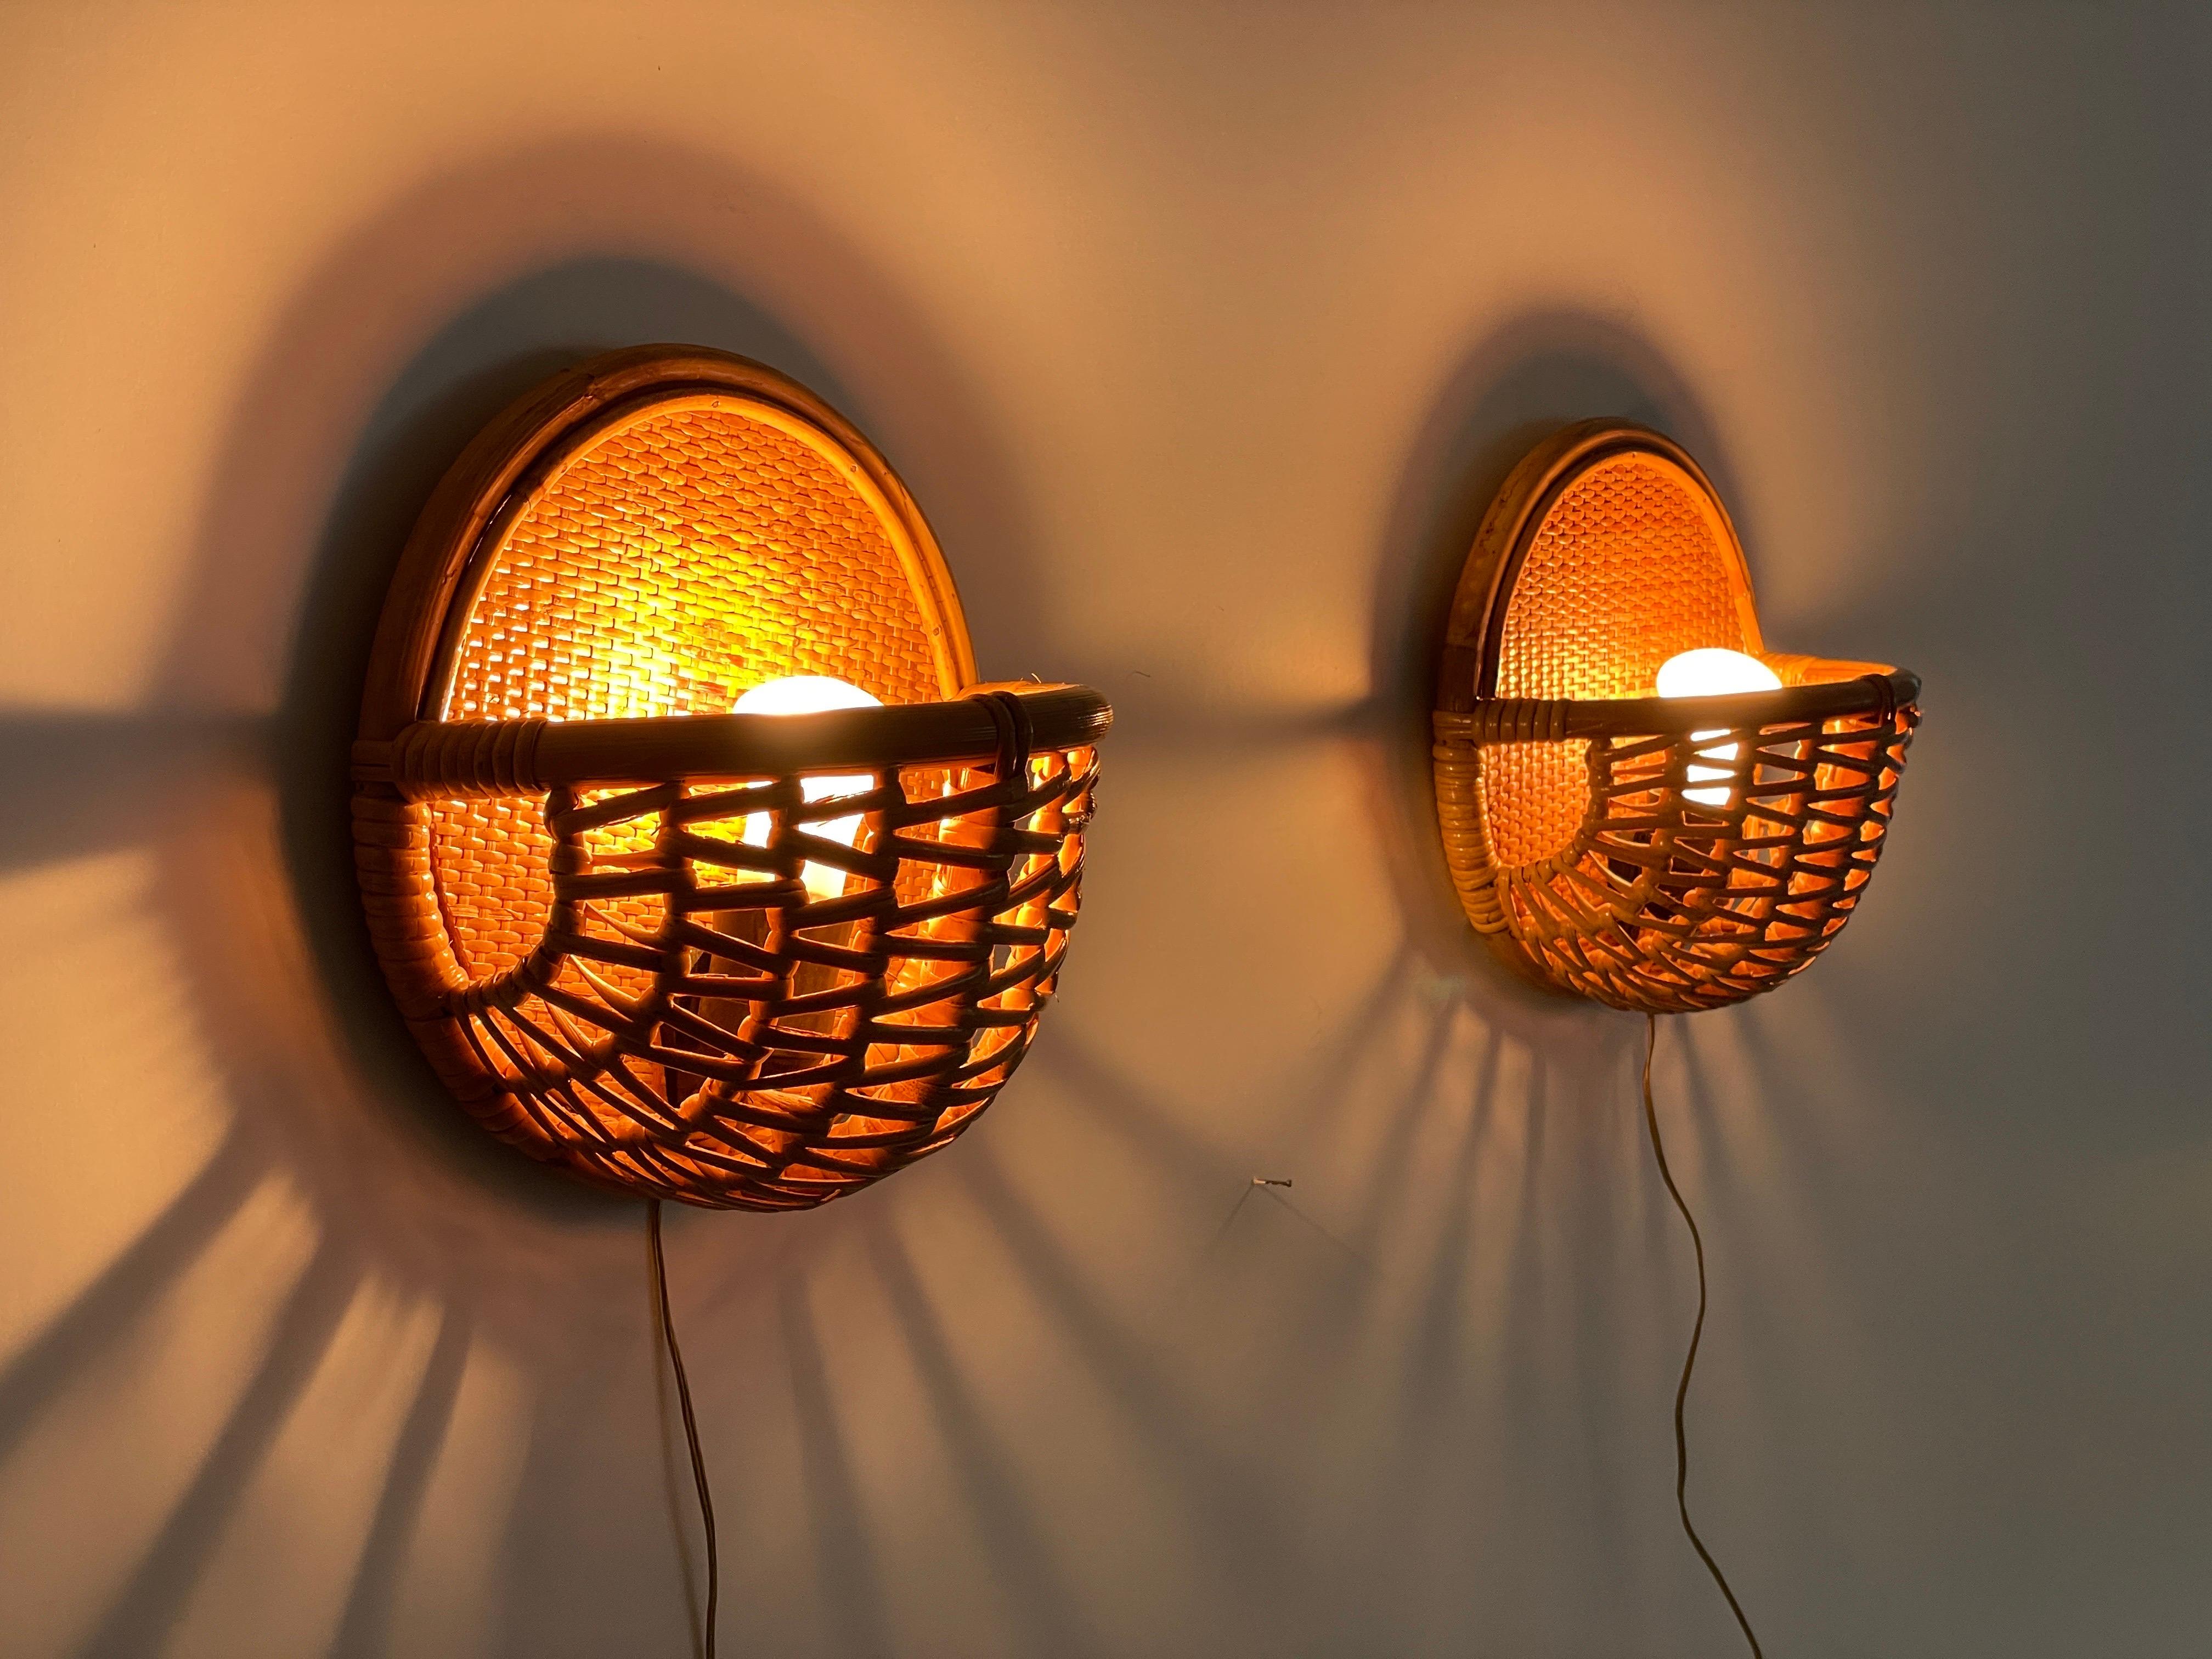 Wicker and Bamboo Round Design Pair of Wall Lamps, 1950s, Italy For Sale 9